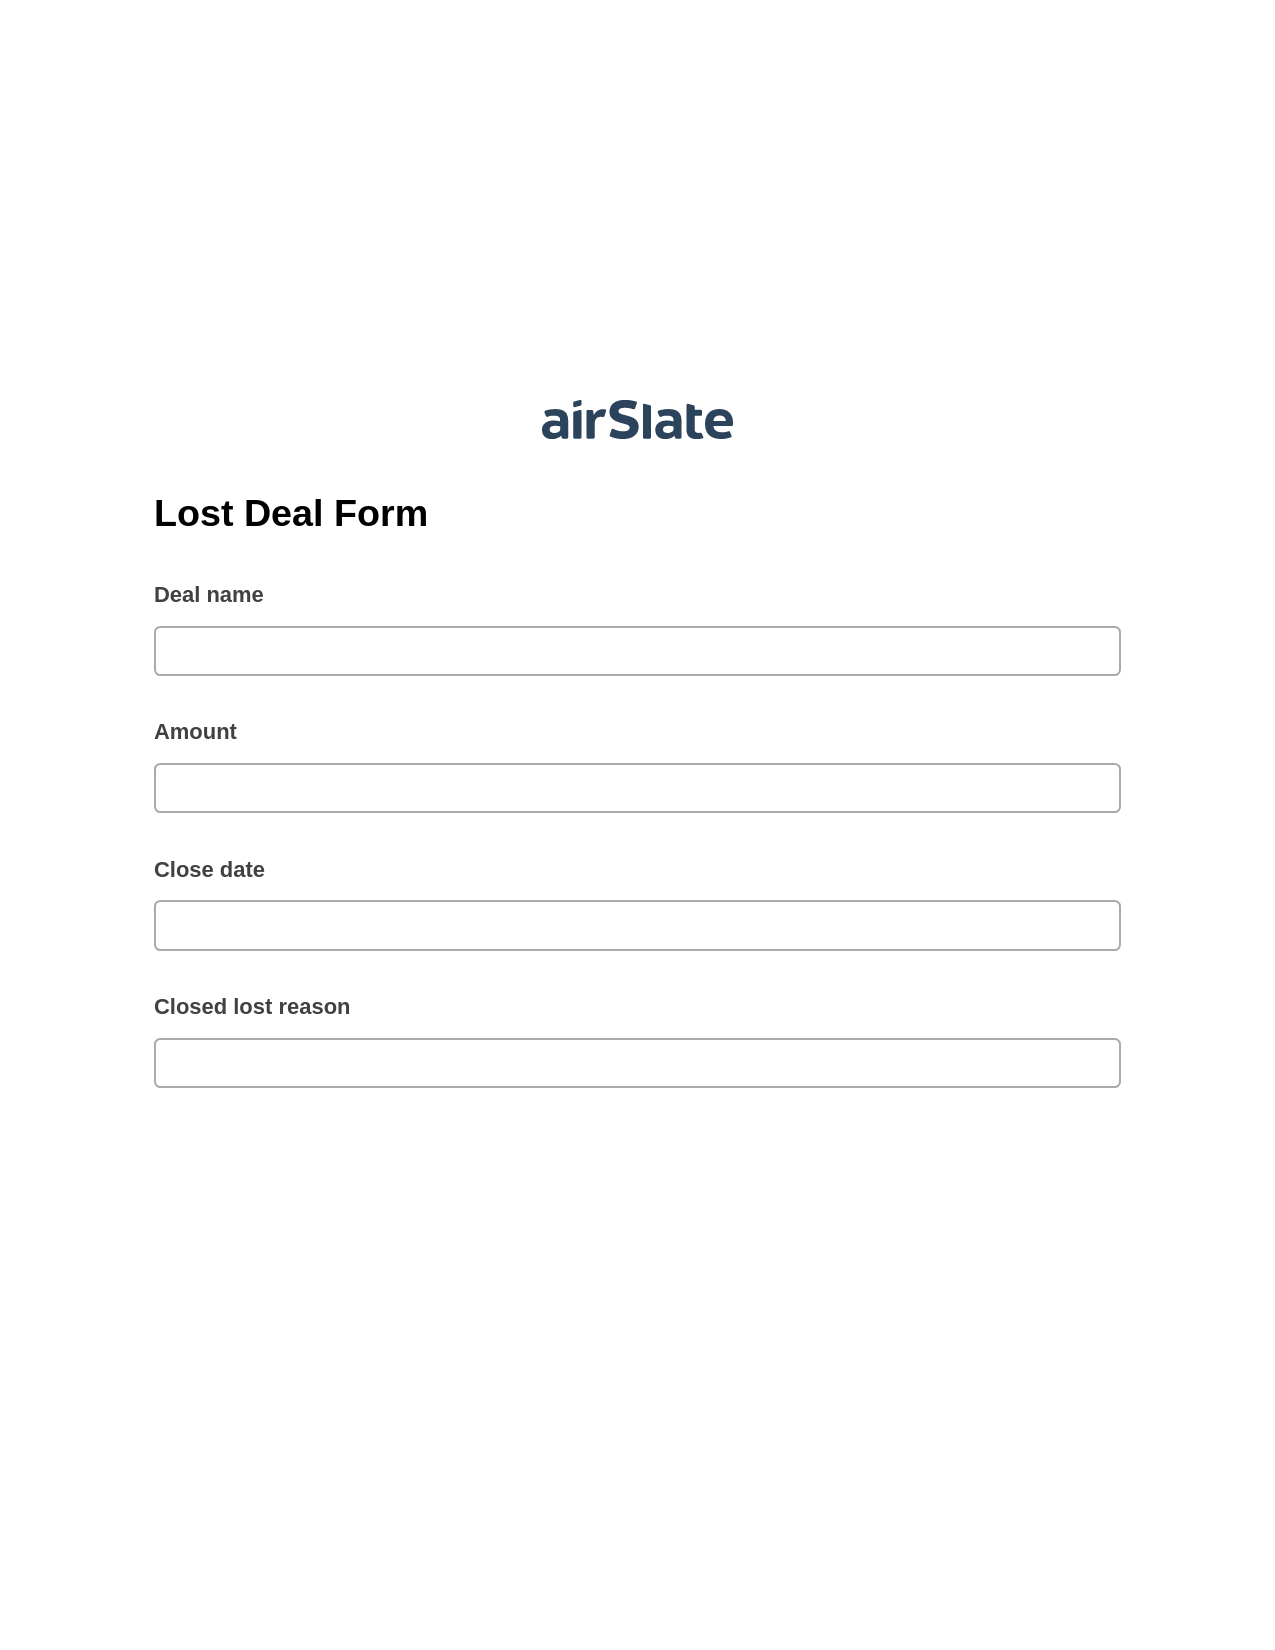 Lost Deal Form Pre-fill from MS Dynamics 365 Records, Add Tags to Slate Bot, Export to Salesforce Record Bot